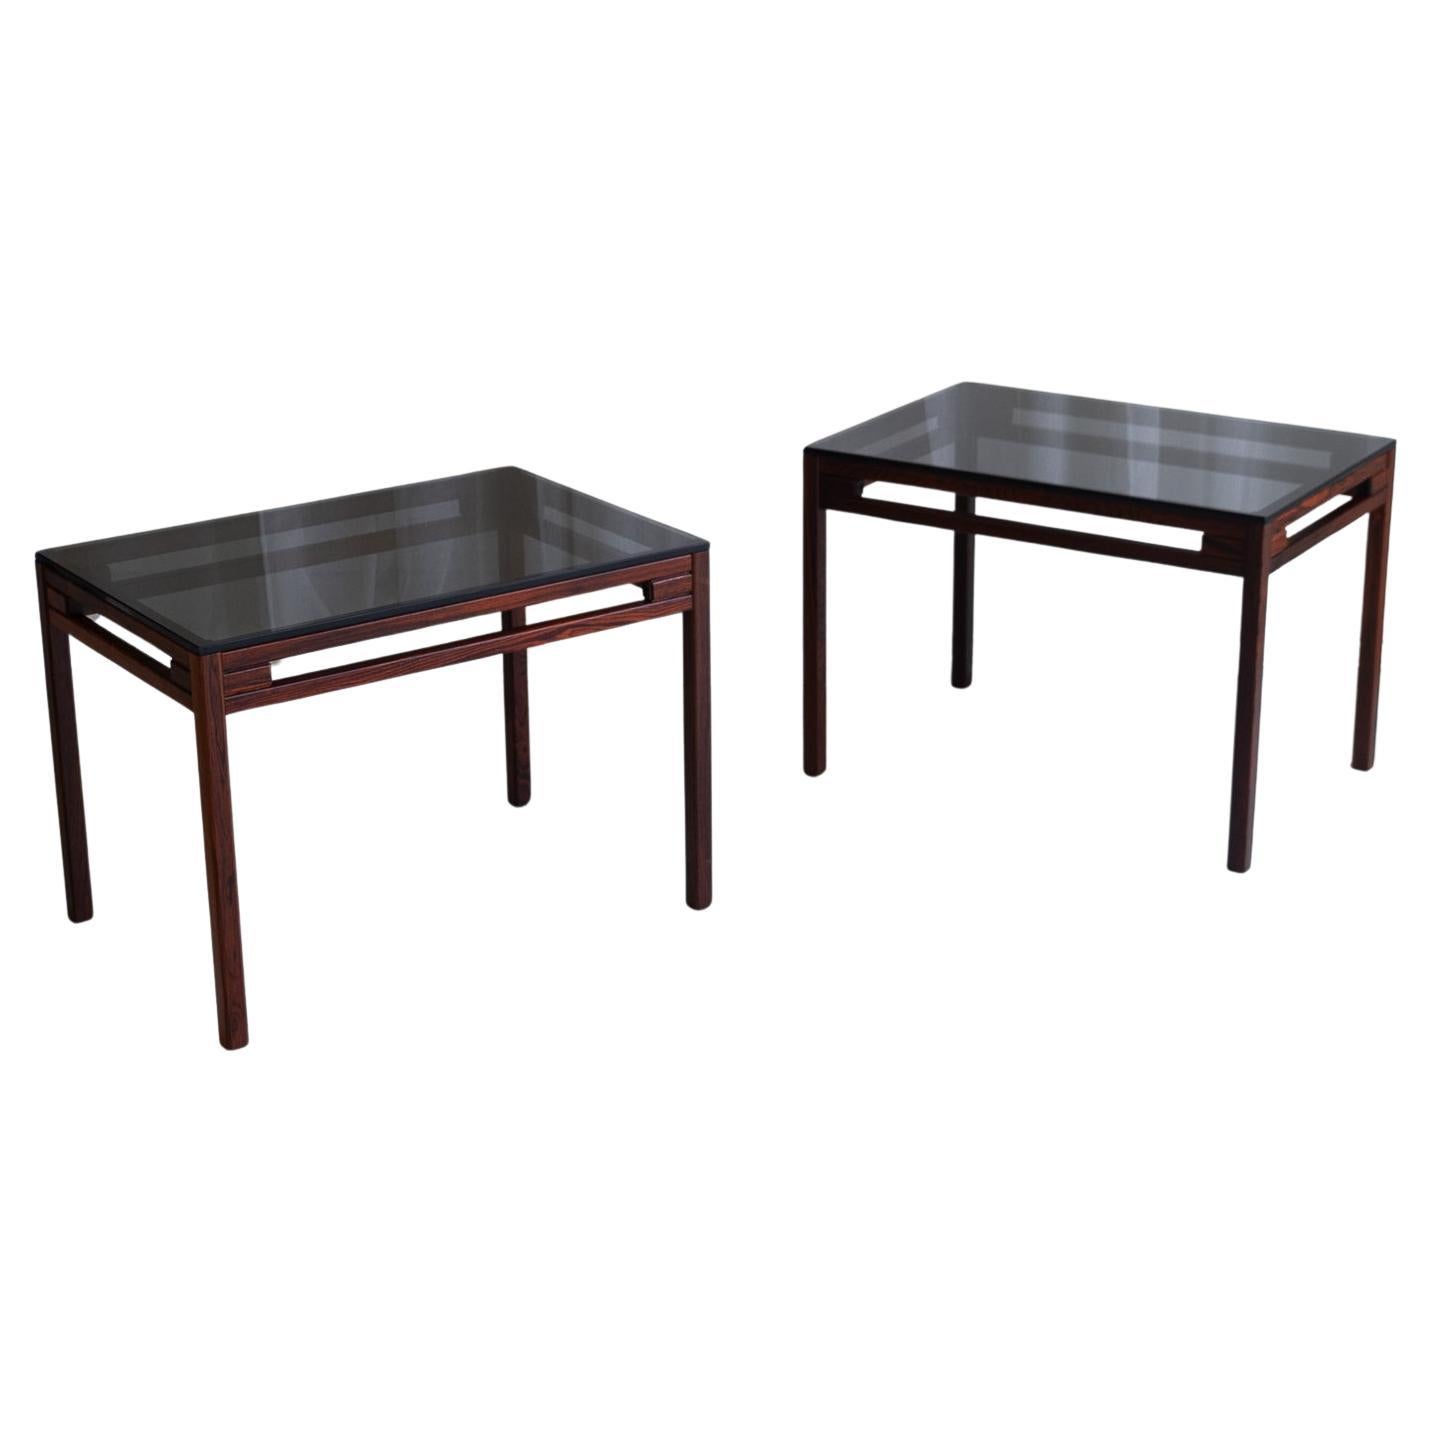 Danish Modern Side Tables in Rosewood and Glass, 1960s. Set of 2. For Sale